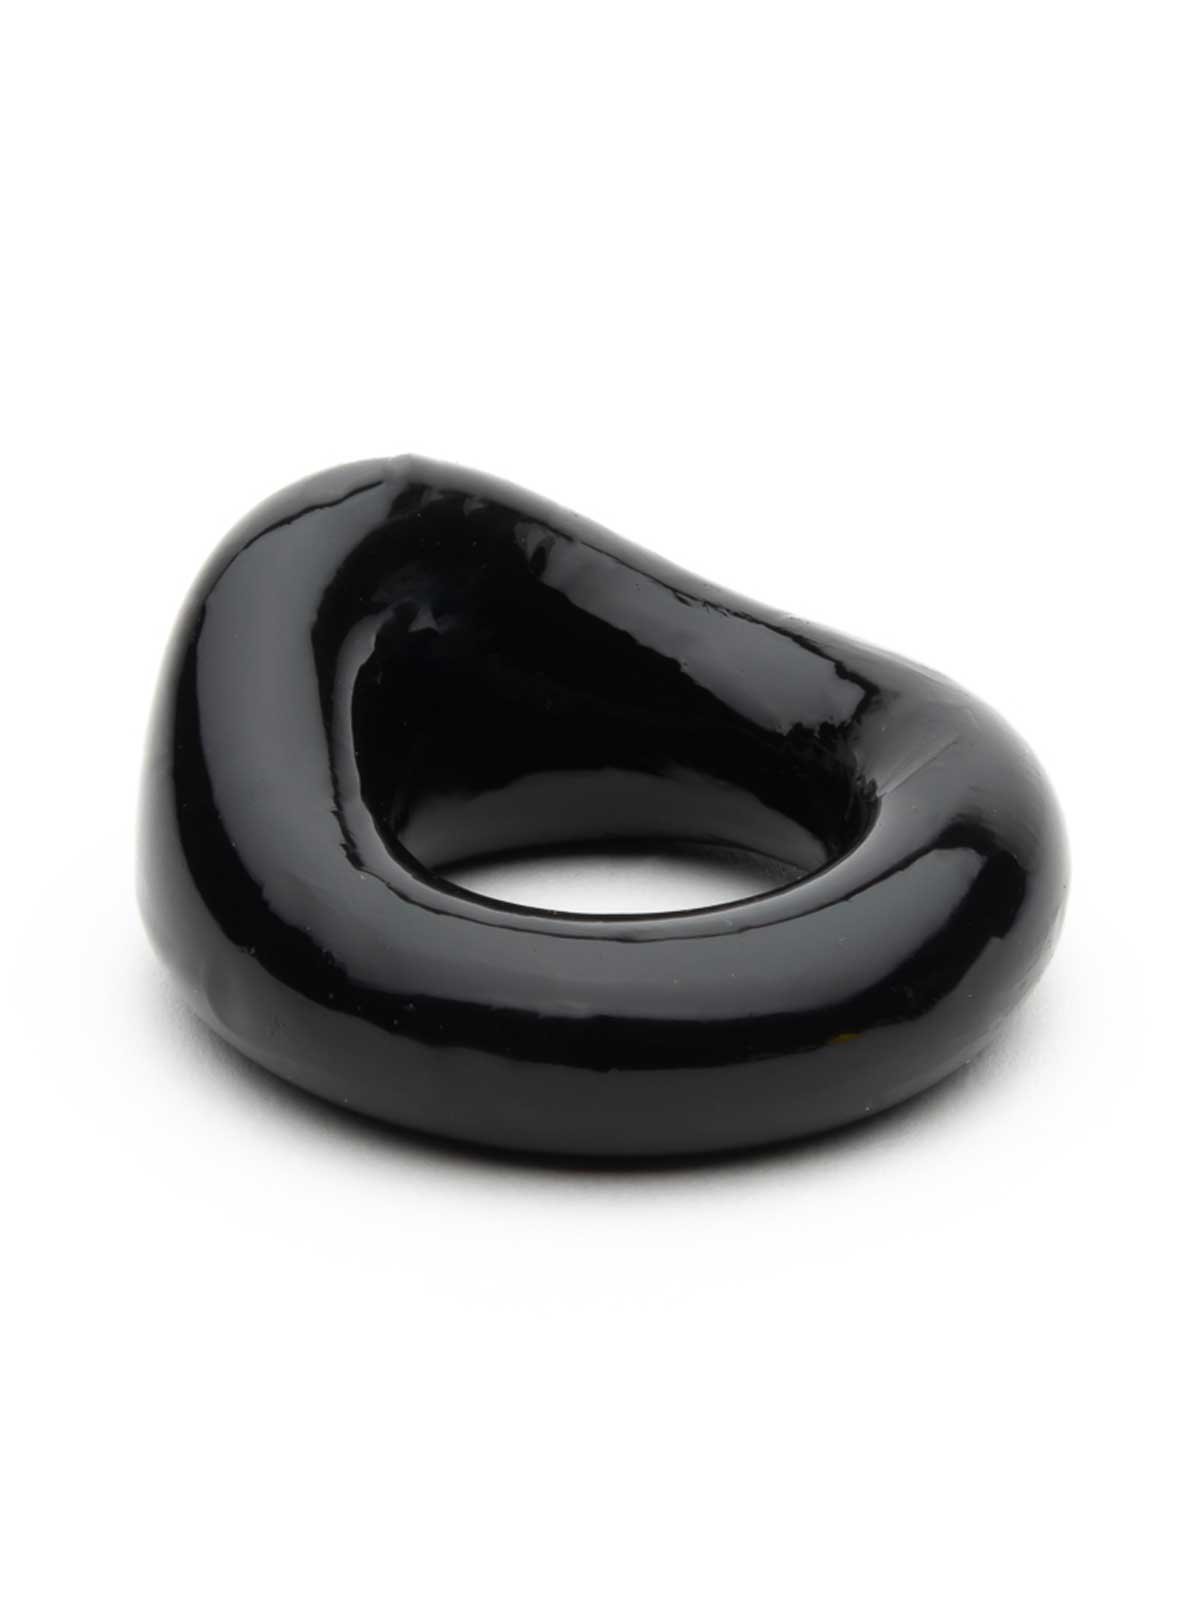 The Wedge Silicone | Black